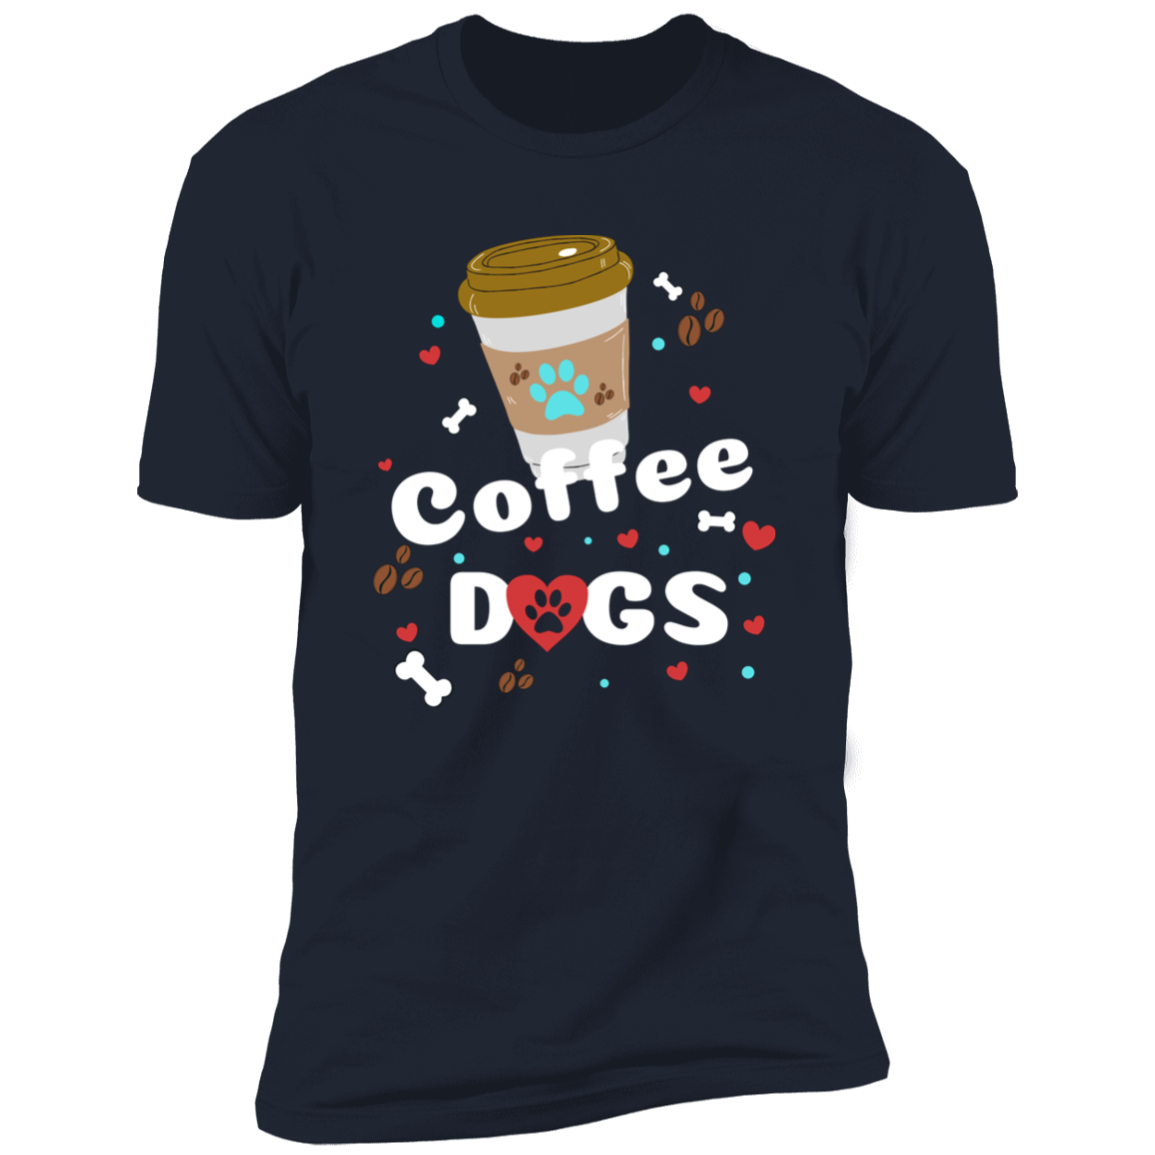 To go Coffee Dogs T-shirt, Dog Shirt for humans, in navy blue